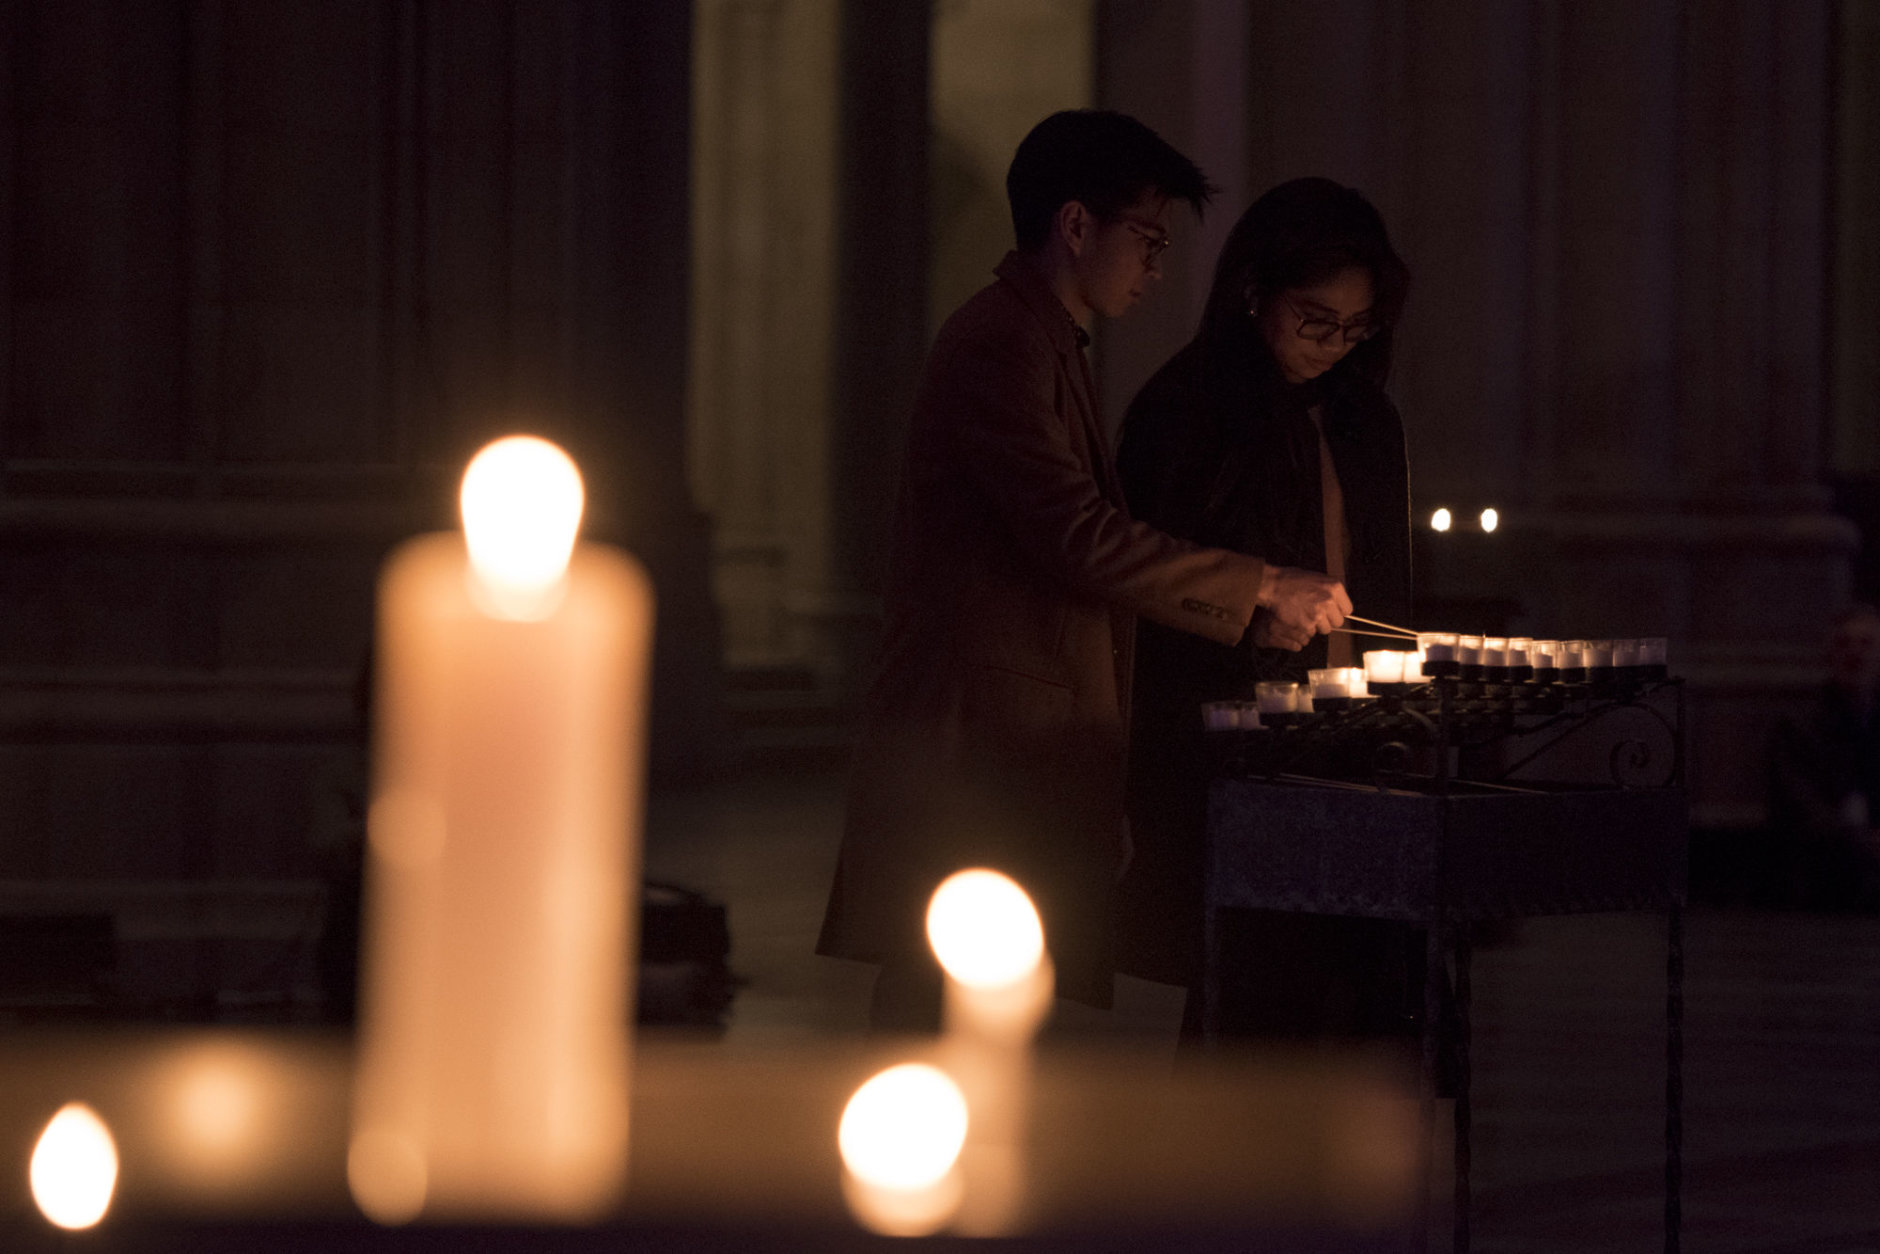 The cathedral opened its doors to prayer and meditation Tuesday night as part of the week's "Seeing Deeper" events. (Courtesy Washington National Cathedral)